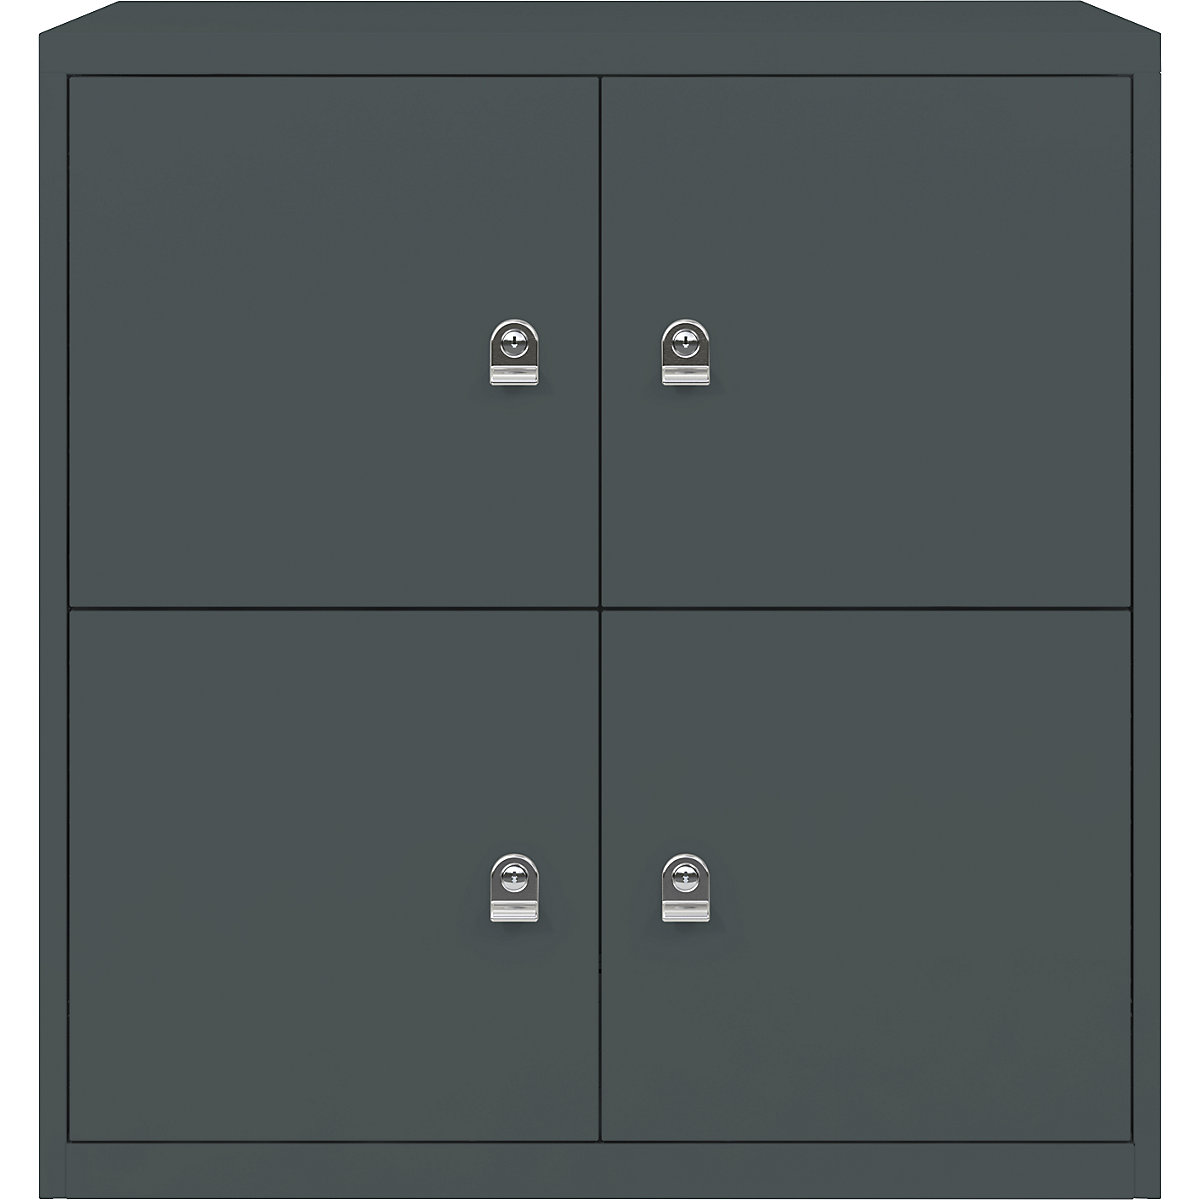 BISLEY – LateralFile™ lodge, with 4 lockable compartments, height 375 mm each, slate